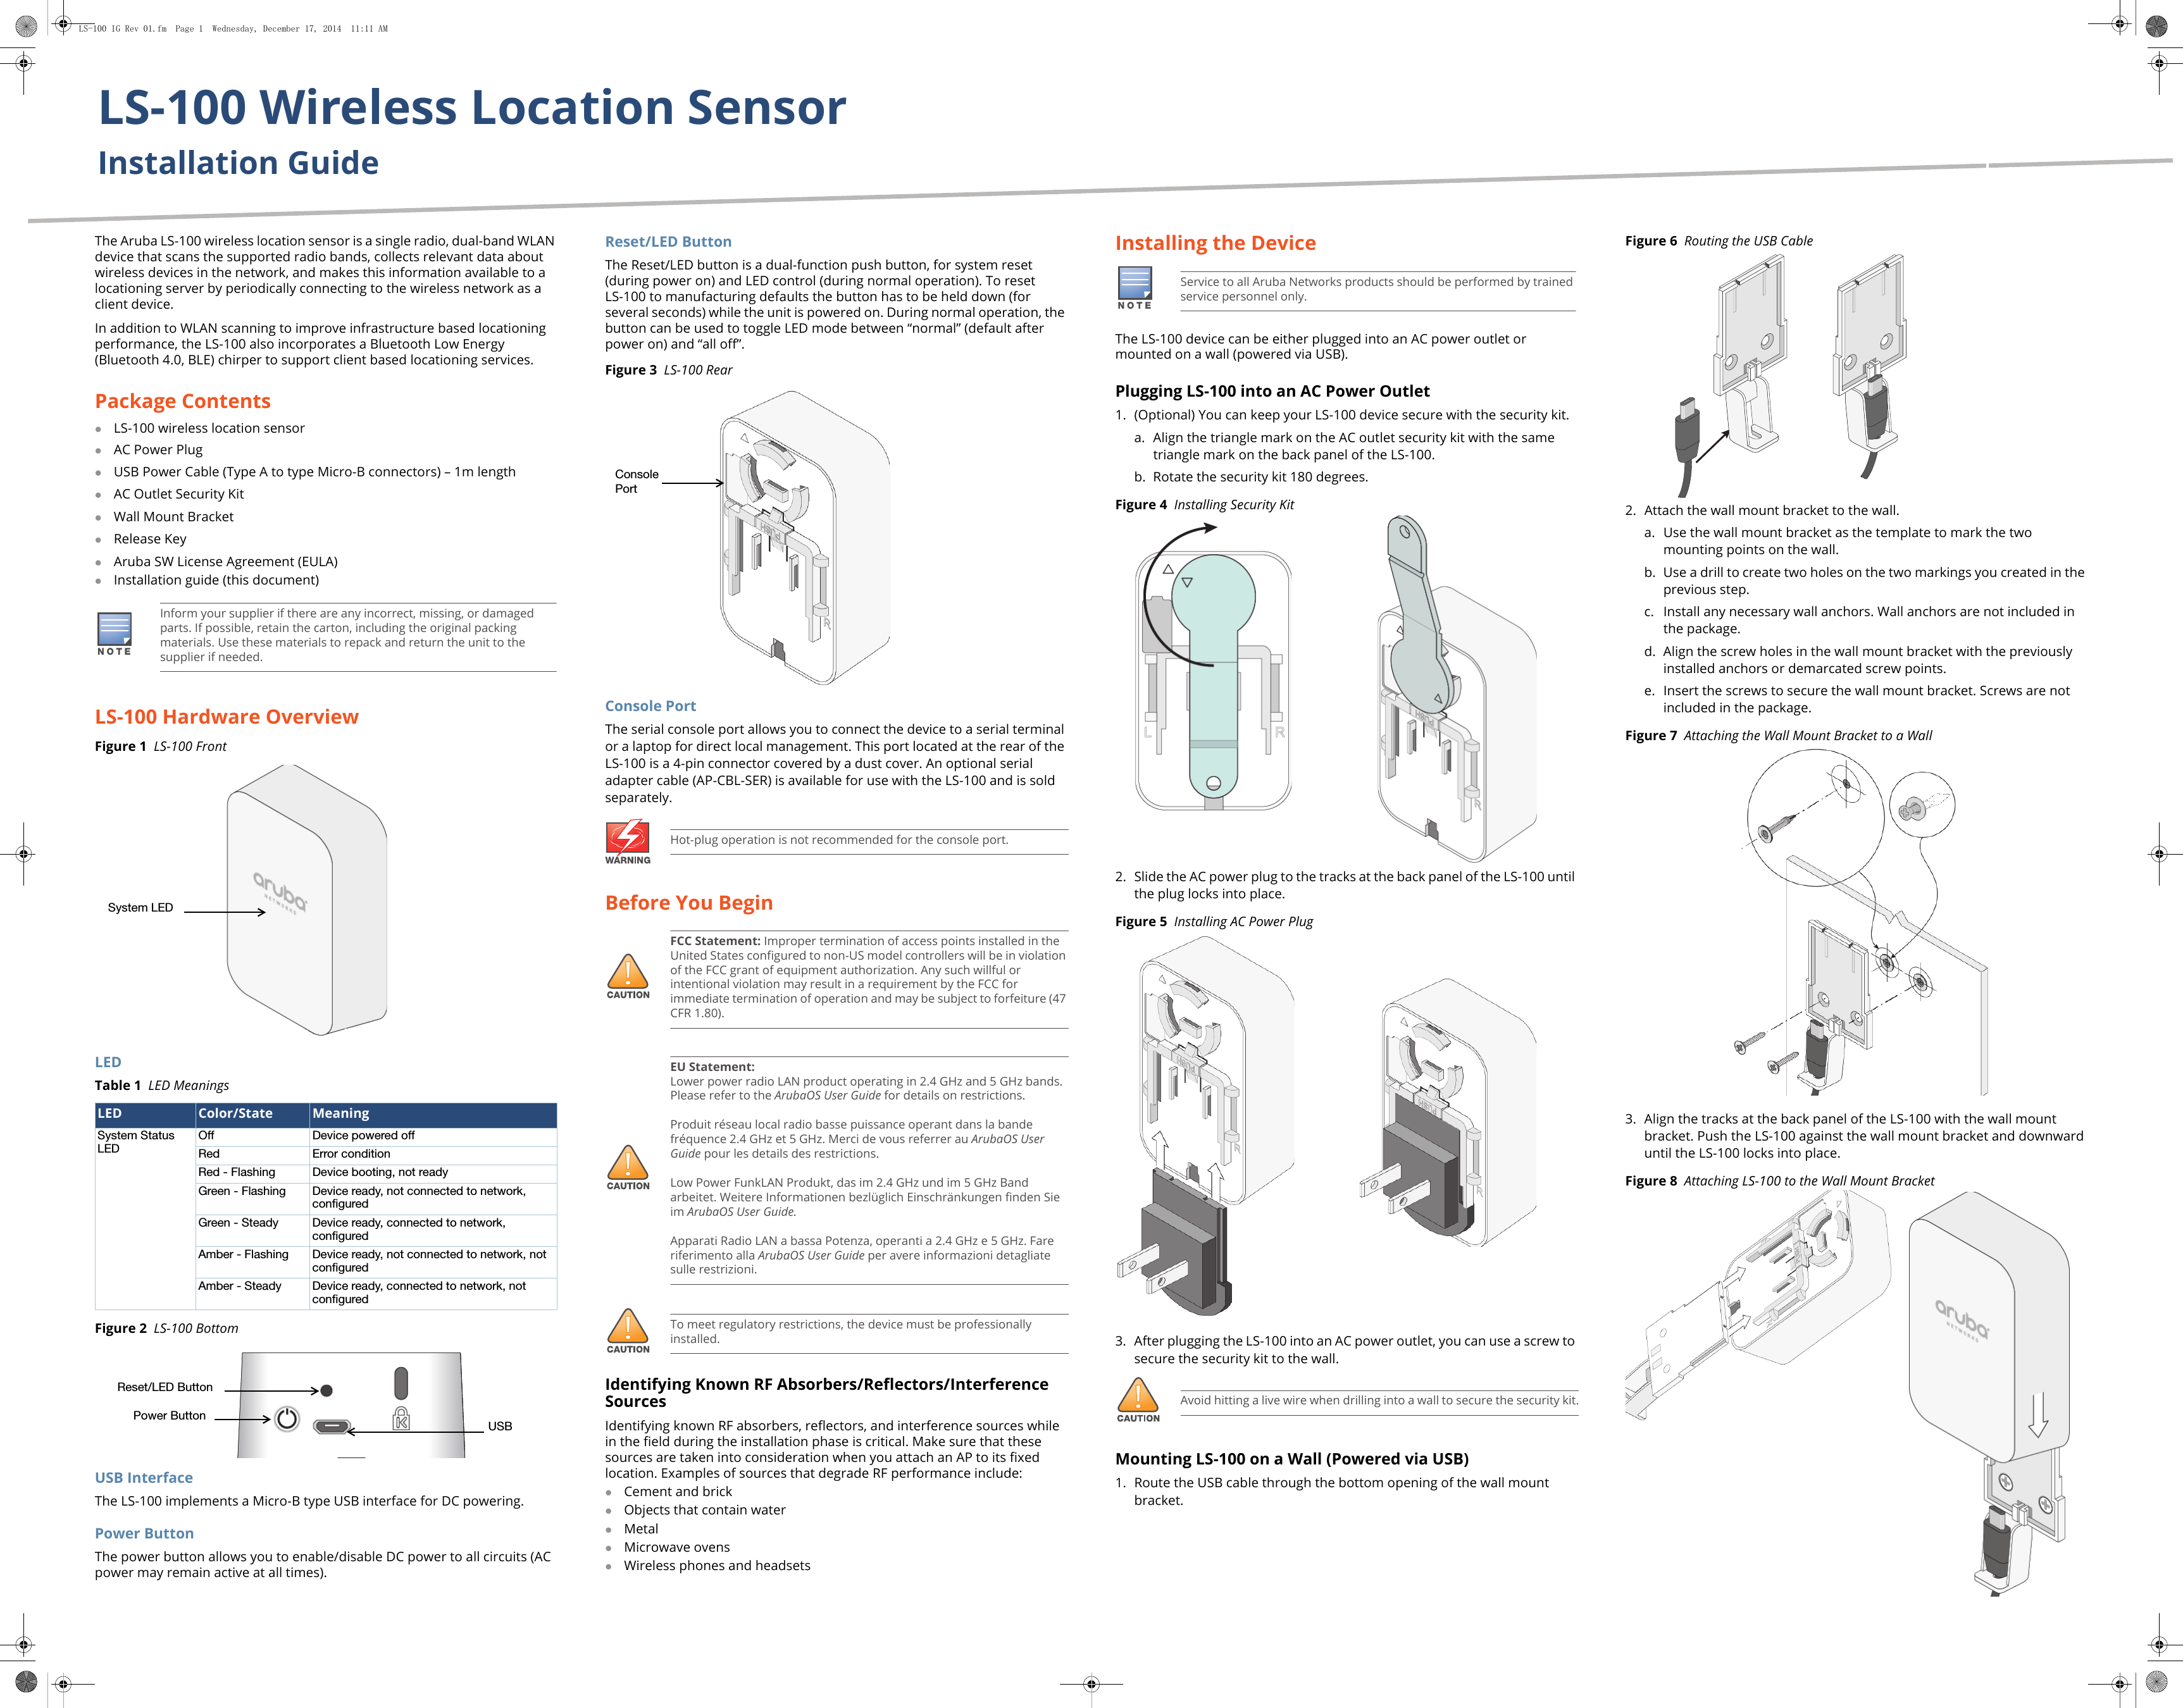 LS-100 Wireless Location SensorInstallation GuideThe Aruba LS-100 wireless location sensor is a single radio, dual-band WLAN device that scans the supported radio bands, collects relevant data about wireless devices in the network, and makes this information available to a locationing server by periodically connecting to the wireless network as a client device. In addition to WLAN scanning to improve infrastructure based locationing performance, the LS-100 also incorporates a Bluetooth Low Energy (Bluetooth 4.0, BLE) chirper to support client based locationing services.Package ContentsLS-100 wireless location sensorAC Power PlugUSB Power Cable (Type A to type Micro-B connectors) – 1m lengthAC Outlet Security KitWall Mount BracketRelease Key Aruba SW License Agreement (EULA) Installation guide (this document)LS-100 Hardware OverviewFigure 1  LS-100 FrontLEDTable 1  LED MeaningsFigure 2  LS-100 BottomUSB InterfaceThe LS-100 implements a Micro-B type USB interface for DC powering. Power ButtonThe power button allows you to enable/disable DC power to all circuits (AC power may remain active at all times).Reset/LED ButtonThe Reset/LED button is a dual-function push button, for system reset (during power on) and LED control (during normal operation). To reset LS-100 to manufacturing defaults the button has to be held down (for several seconds) while the unit is powered on. During normal operation, the button can be used to toggle LED mode between “normal” (default after power on) and “all off”.Figure 3  LS-100 RearConsole PortThe serial console port allows you to connect the device to a serial terminal or a laptop for direct local management. This port located at the rear of the LS-100 is a 4-pin connector covered by a dust cover. An optional serial adapter cable (AP-CBL-SER) is available for use with the LS-100 and is sold separately.Before You BeginIdentifying Known RF Absorbers/Reflectors/Interference SourcesIdentifying known RF absorbers, reflectors, and interference sources while in the field during the installation phase is critical. Make sure that these sources are taken into consideration when you attach an AP to its fixed location. Examples of sources that degrade RF performance include:Cement and brickObjects that contain waterMetalMicrowave ovensWireless phones and headsetsInstalling the DeviceThe LS-100 device can be either plugged into an AC power outlet or mounted on a wall (powered via USB). Plugging LS-100 into an AC Power Outlet1. (Optional) You can keep your LS-100 device secure with the security kit.a. Align the triangle mark on the AC outlet security kit with the same triangle mark on the back panel of the LS-100.b. Rotate the security kit 180 degrees.Figure 4  Installing Security Kit2. Slide the AC power plug to the tracks at the back panel of the LS-100 until the plug locks into place.Figure 5  Installing AC Power Plug3. After plugging the LS-100 into an AC power outlet, you can use a screw to secure the security kit to the wall.Mounting LS-100 on a Wall (Powered via USB)1. Route the USB cable through the bottom opening of the wall mount bracket.Figure 6  Routing the USB Cable  2. Attach the wall mount bracket to the wall.a. Use the wall mount bracket as the template to mark the two mounting points on the wall.b. Use a drill to create two holes on the two markings you created in the previous step.c. Install any necessary wall anchors. Wall anchors are not included in the package.d. Align the screw holes in the wall mount bracket with the previously installed anchors or demarcated screw points.e. Insert the screws to secure the wall mount bracket. Screws are not included in the package.Figure 7  Attaching the Wall Mount Bracket to a Wall 3. Align the tracks at the back panel of the LS-100 with the wall mount bracket. Push the LS-100 against the wall mount bracket and downward until the LS-100 locks into place.Figure 8  Attaching LS-100 to the Wall Mount BracketNOTEInform your supplier if there are any incorrect, missing, or damaged parts. If possible, retain the carton, including the original packing materials. Use these materials to repack and return the unit to the supplier if needed.LED Color/State MeaningSystem Status LED Off Device powered offRed Error conditionRed - Flashing Device booting, not readyGreen - Flashing Device ready, not connected to network, configuredGreen - Steady Device ready, connected to network, configuredAmber - Flashing Device ready, not connected to network, not configuredAmber - Steady Device ready, connected to network, not configured System LED USB Reset/LED Button Power ButtonHot-plug operation is not recommended for the console port.!FCC Statement: Improper termination of access points installed in the United States configured to non-US model controllers will be in violation of the FCC grant of equipment authorization. Any such willful or intentional violation may result in a requirement by the FCC for immediate termination of operation and may be subject to forfeiture (47 CFR 1.80).!EU Statement: Lower power radio LAN product operating in 2.4 GHz and 5 GHz bands. Please refer to the ArubaOS User Guide for details on restrictions.Produit réseau local radio basse puissance operant dans la bande fréquence 2.4 GHz et 5 GHz. Merci de vous referrer au ArubaOS User Guide pour les details des restrictions.Low Power FunkLAN Produkt, das im 2.4 GHz und im 5 GHz Band arbeitet. Weitere Informationen bezlüglich Einschränkungen finden Sie im ArubaOS User Guide.Apparati Radio LAN a bassa Potenza, operanti a 2.4 GHz e 5 GHz. Fare riferimento alla ArubaOS User Guide per avere informazioni detagliate sulle restrizioni.!To meet regulatory restrictions, the device must be professionally installed.Console PortNOTEService to all Aruba Networks products should be performed by trained service personnel only.!Avoid hitting a live wire when drilling into a wall to secure the security kit.LS-100 IG Rev 01.fm  Page 1  Wednesday, December 17, 2014  11:11 AM